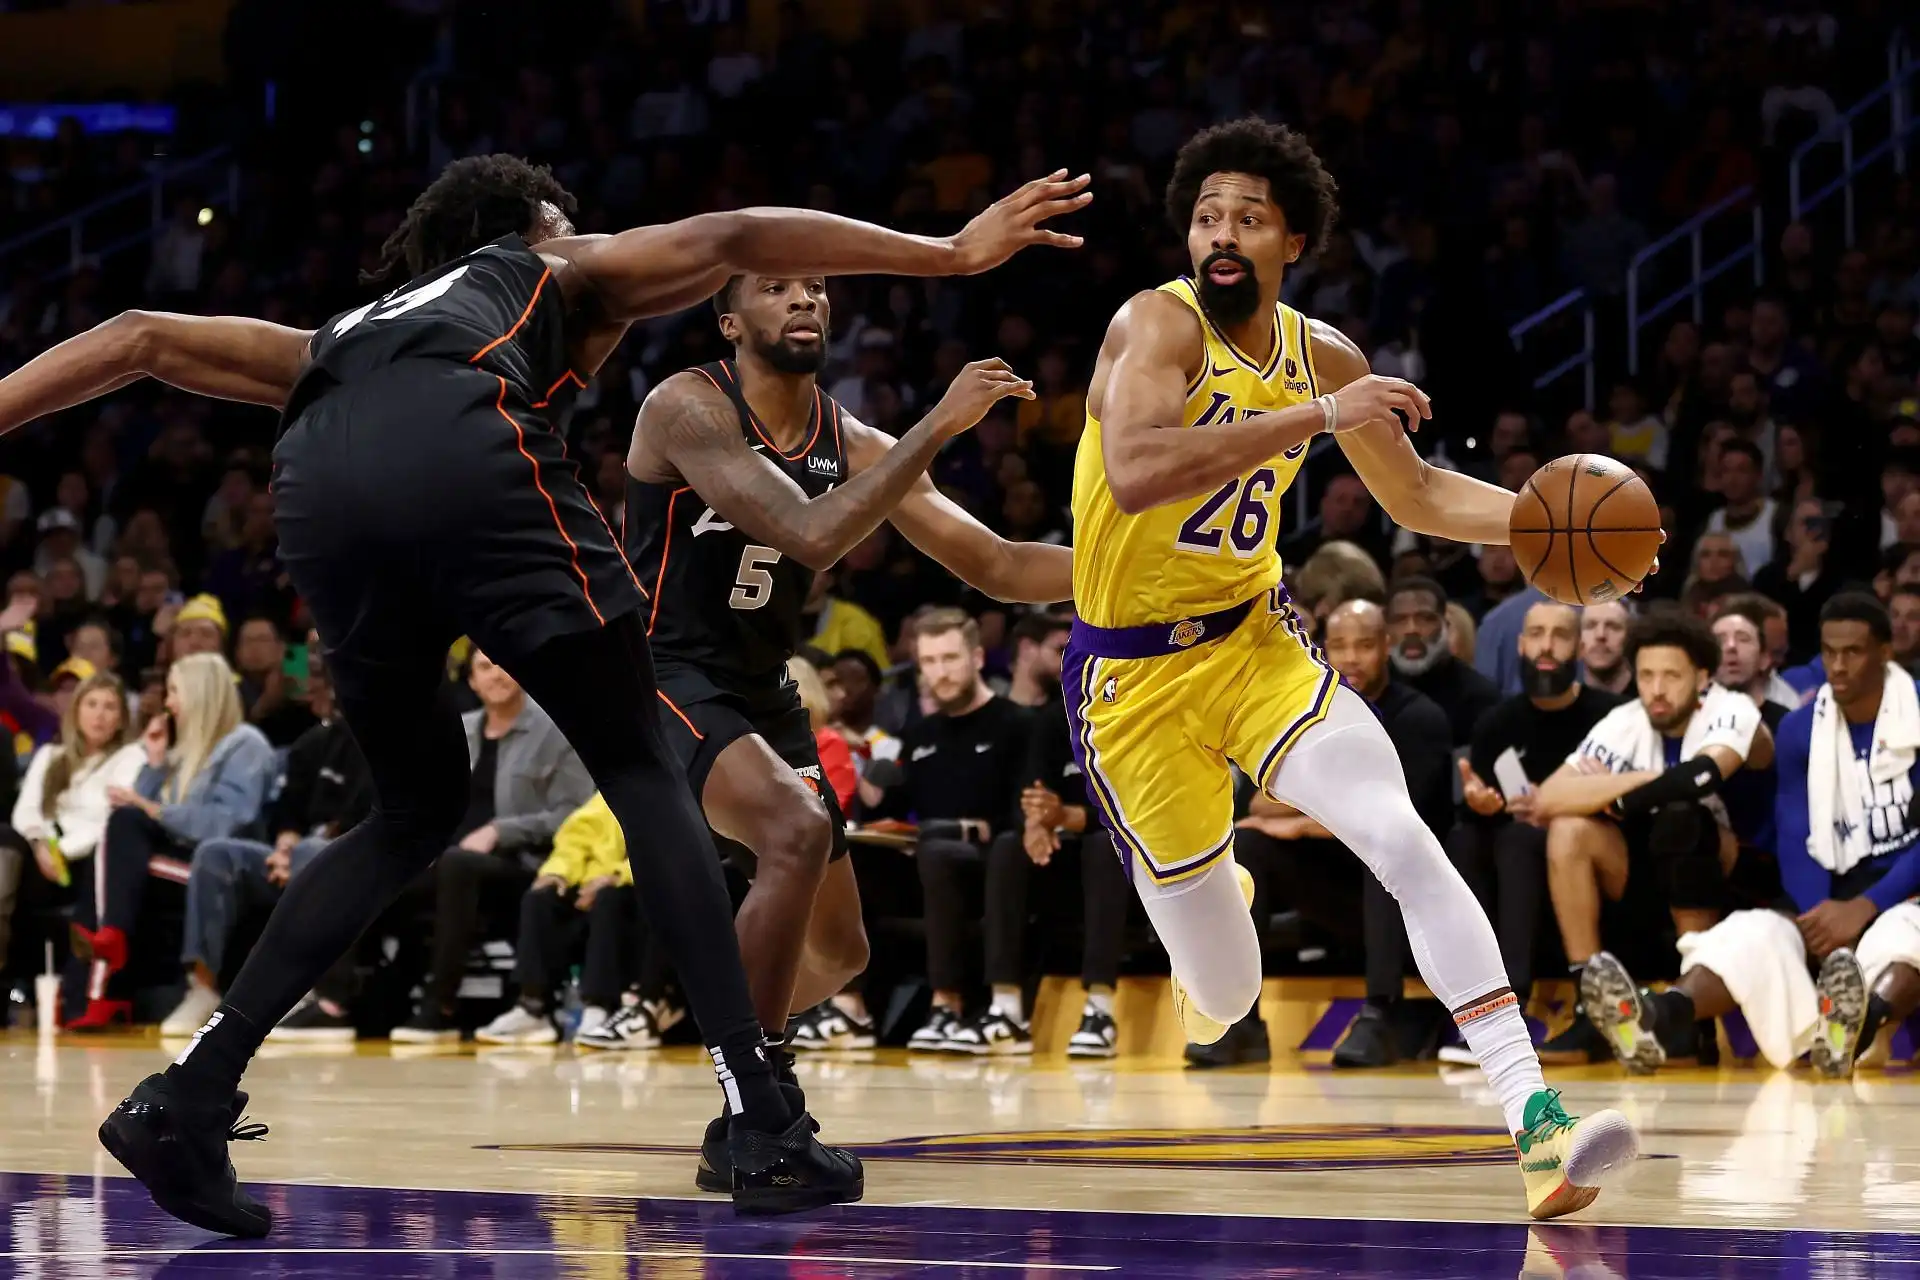 NBA fans unfazed by Lakers dominant win in Spencer Dinwiddie's debut.xtext